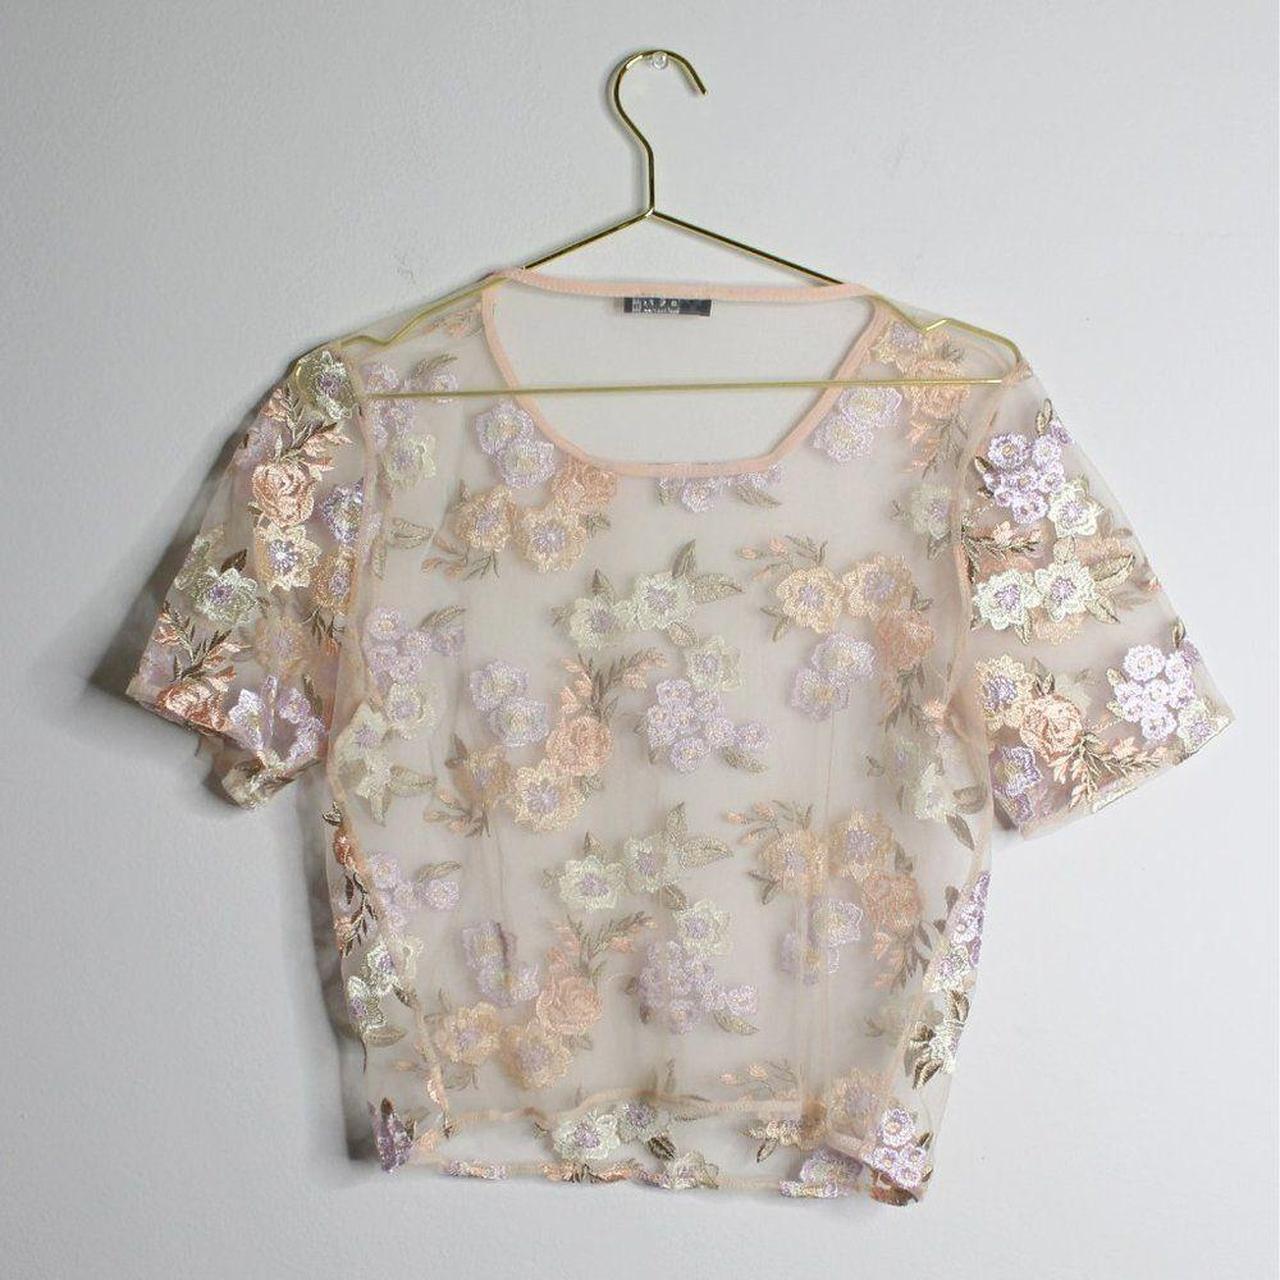 Product Image 2 - Super cute, great condition floral